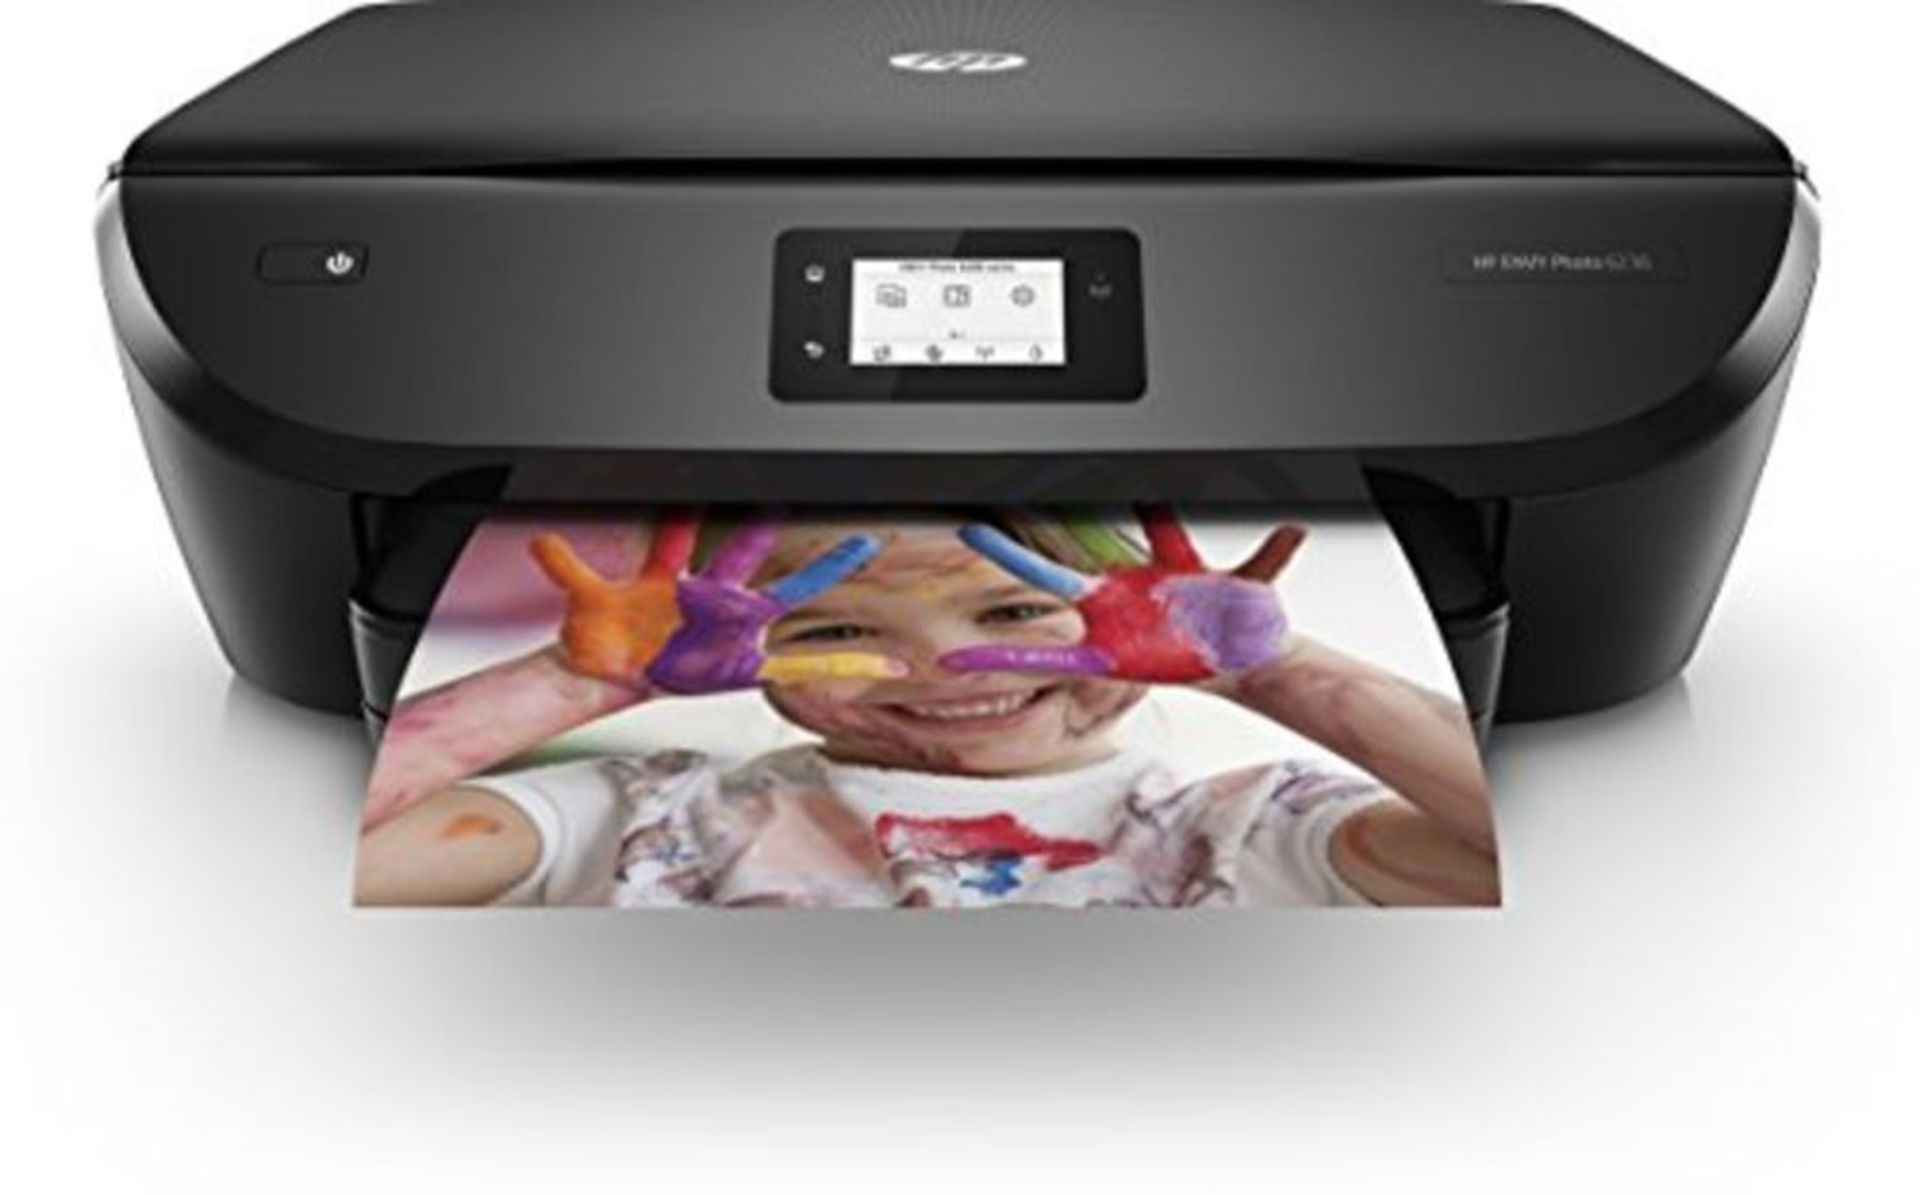 RRP £79.00 HP Envy Photo 6230 All-in-One Wi-Fi Photo Printer with 4 Months of Instant Ink Include